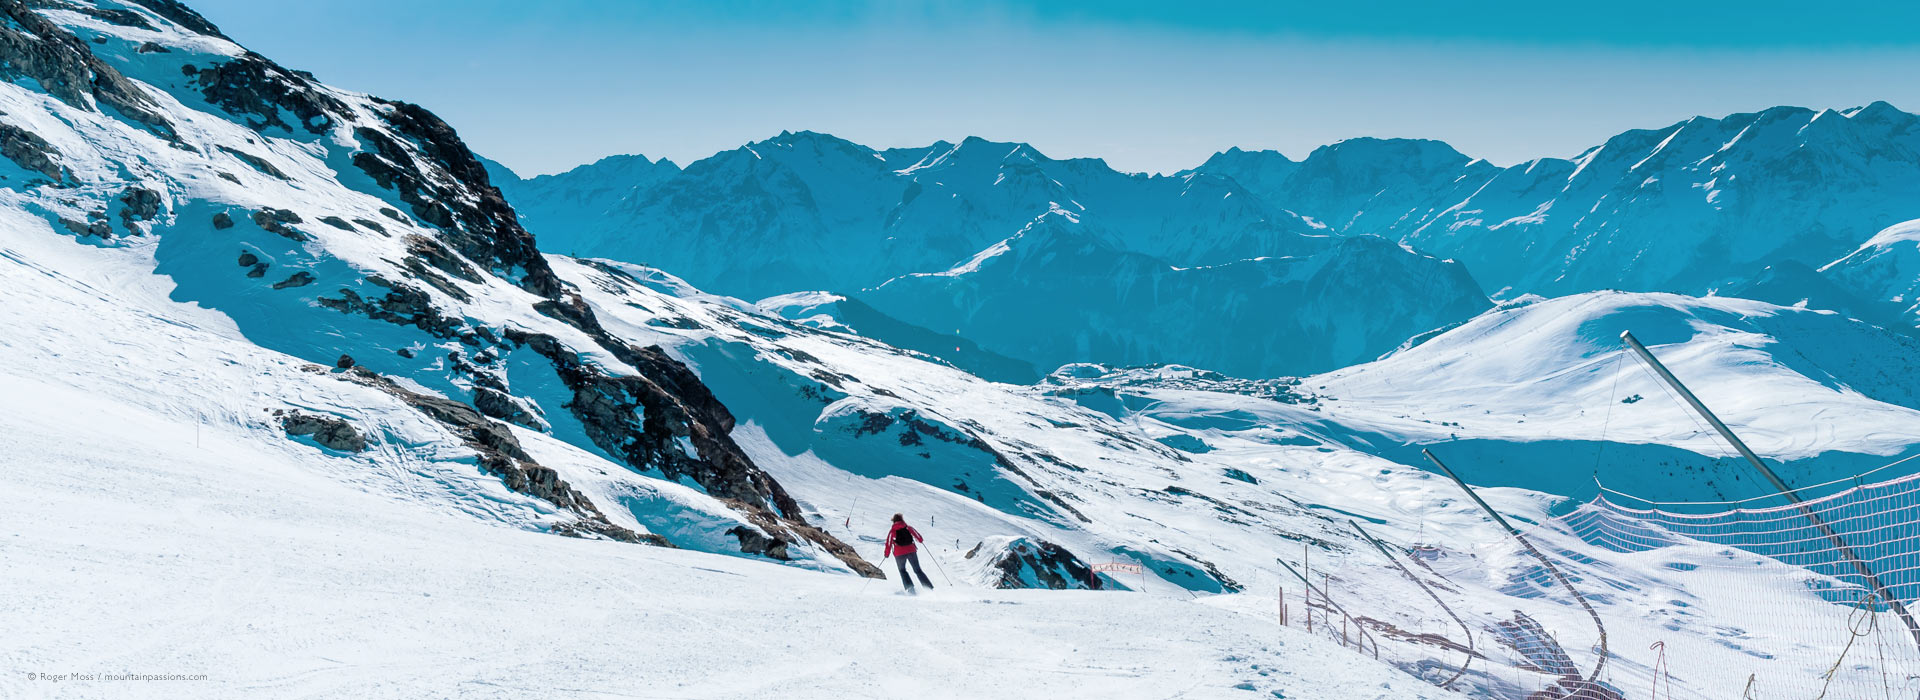 Wide view of skier on piste with mountains and Alpe d'Huez ski village in background.